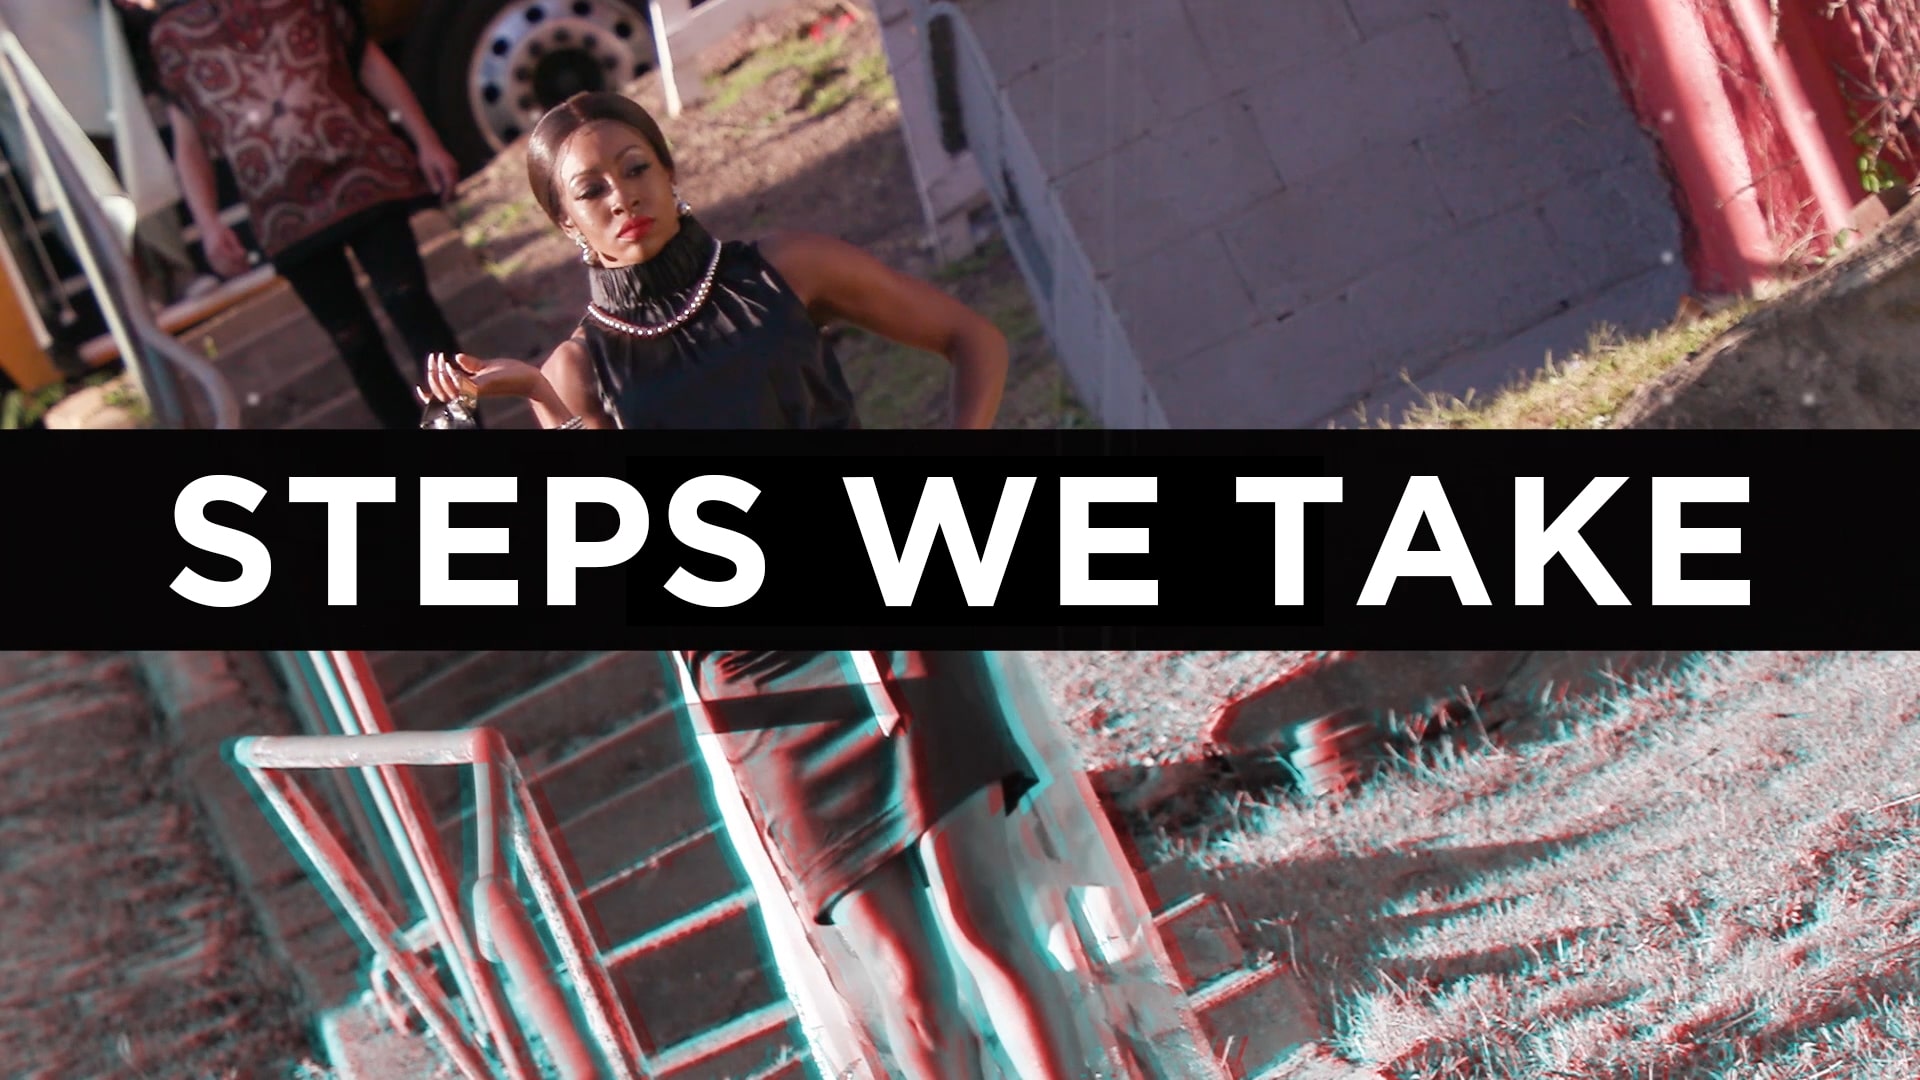 Steps We Take - West End Fashion Show Event Highlight Video - Pittsburgh Video Production Company